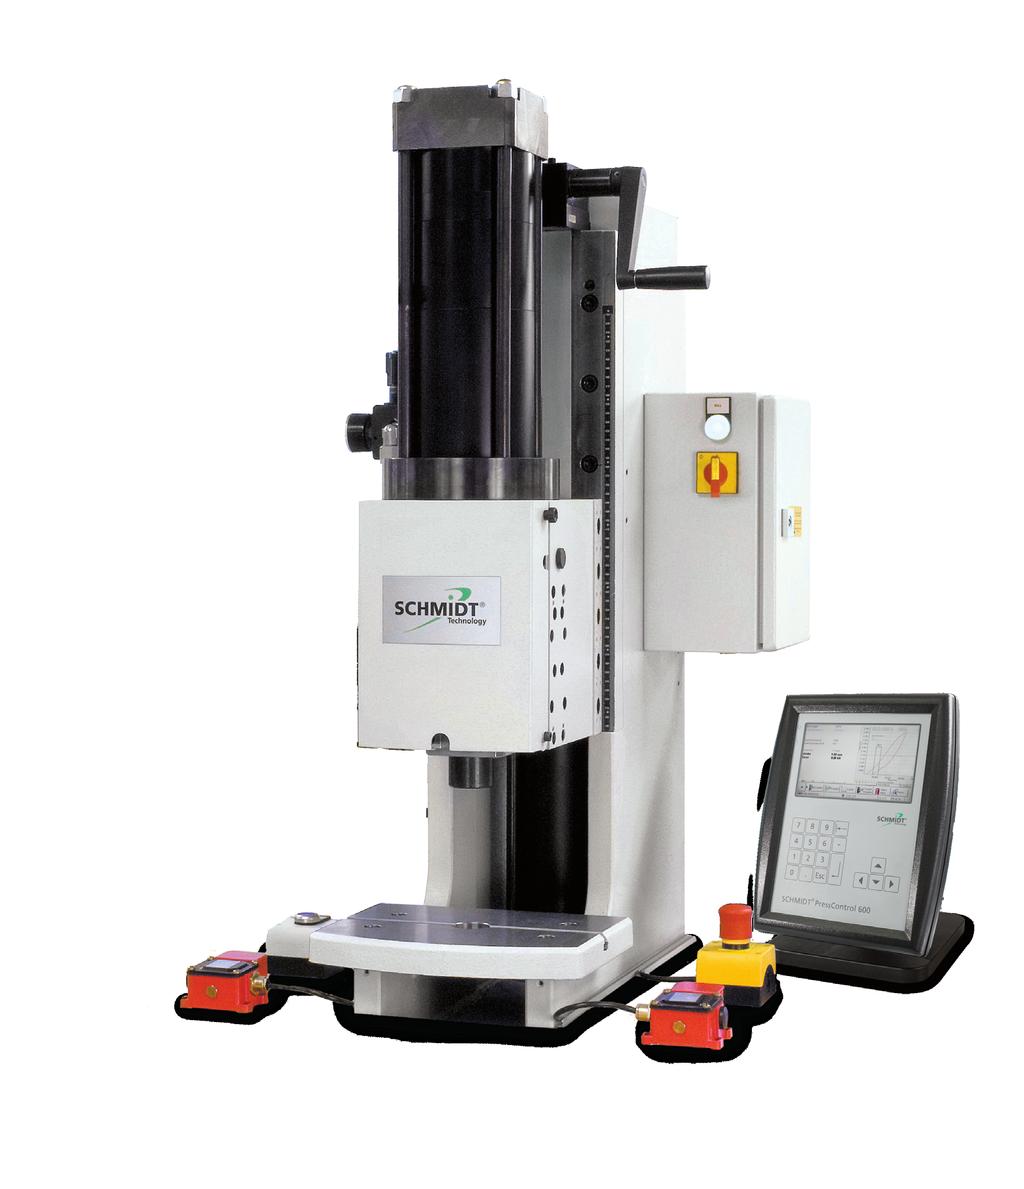 SCHMIDT HydroPneumaticPress Maximum force range from 1 kn to 220 kn The SCHMIDT HydroPneumaticPress range consists of a modular system suitable for transforming, joining and assembling optimally